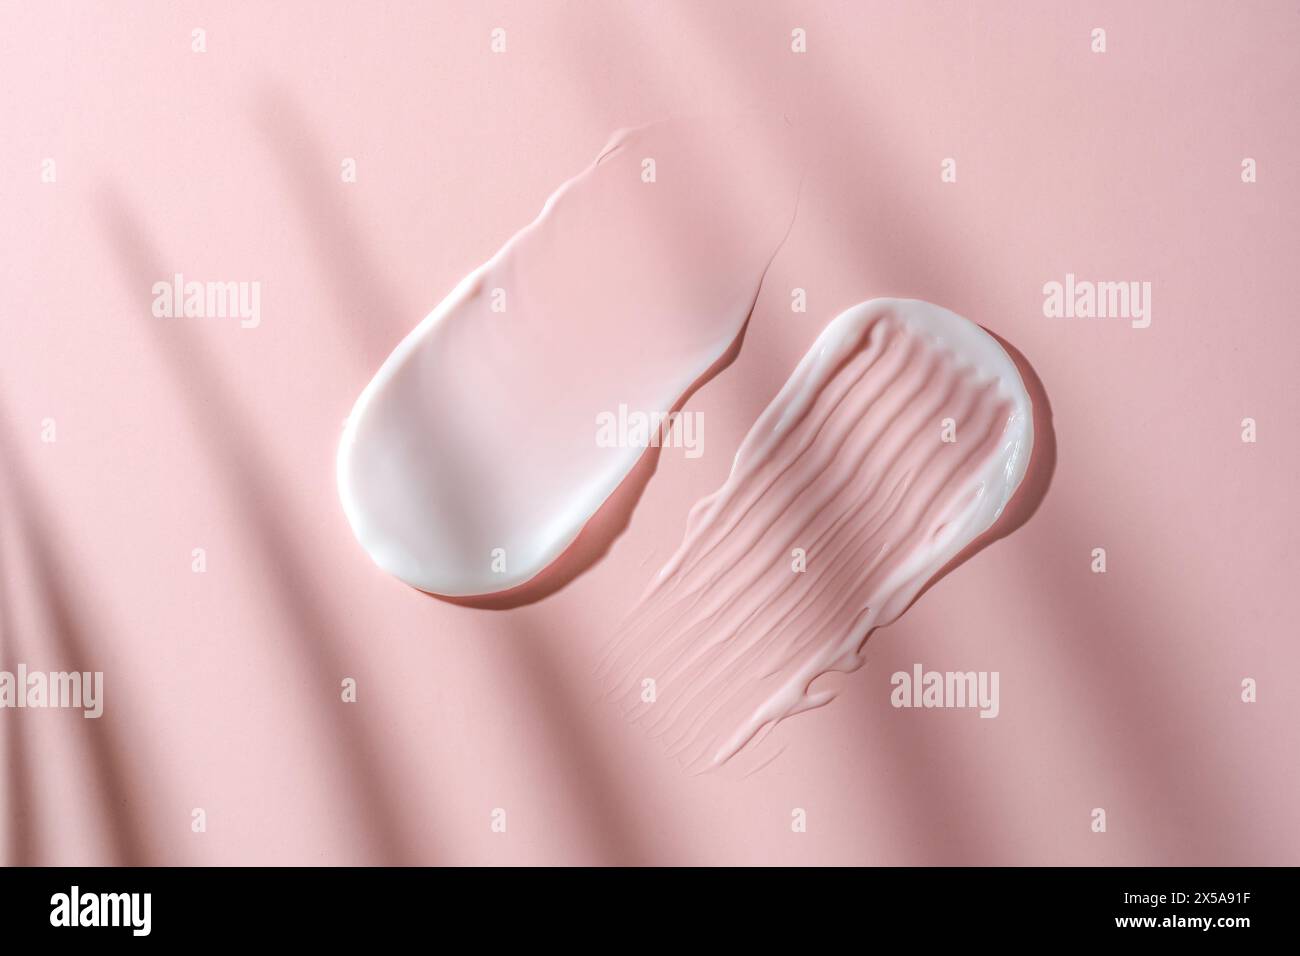 Swatches of cosmetic cream on a pink background, highlighting smooth textures and skincare product consistency Stock Photo